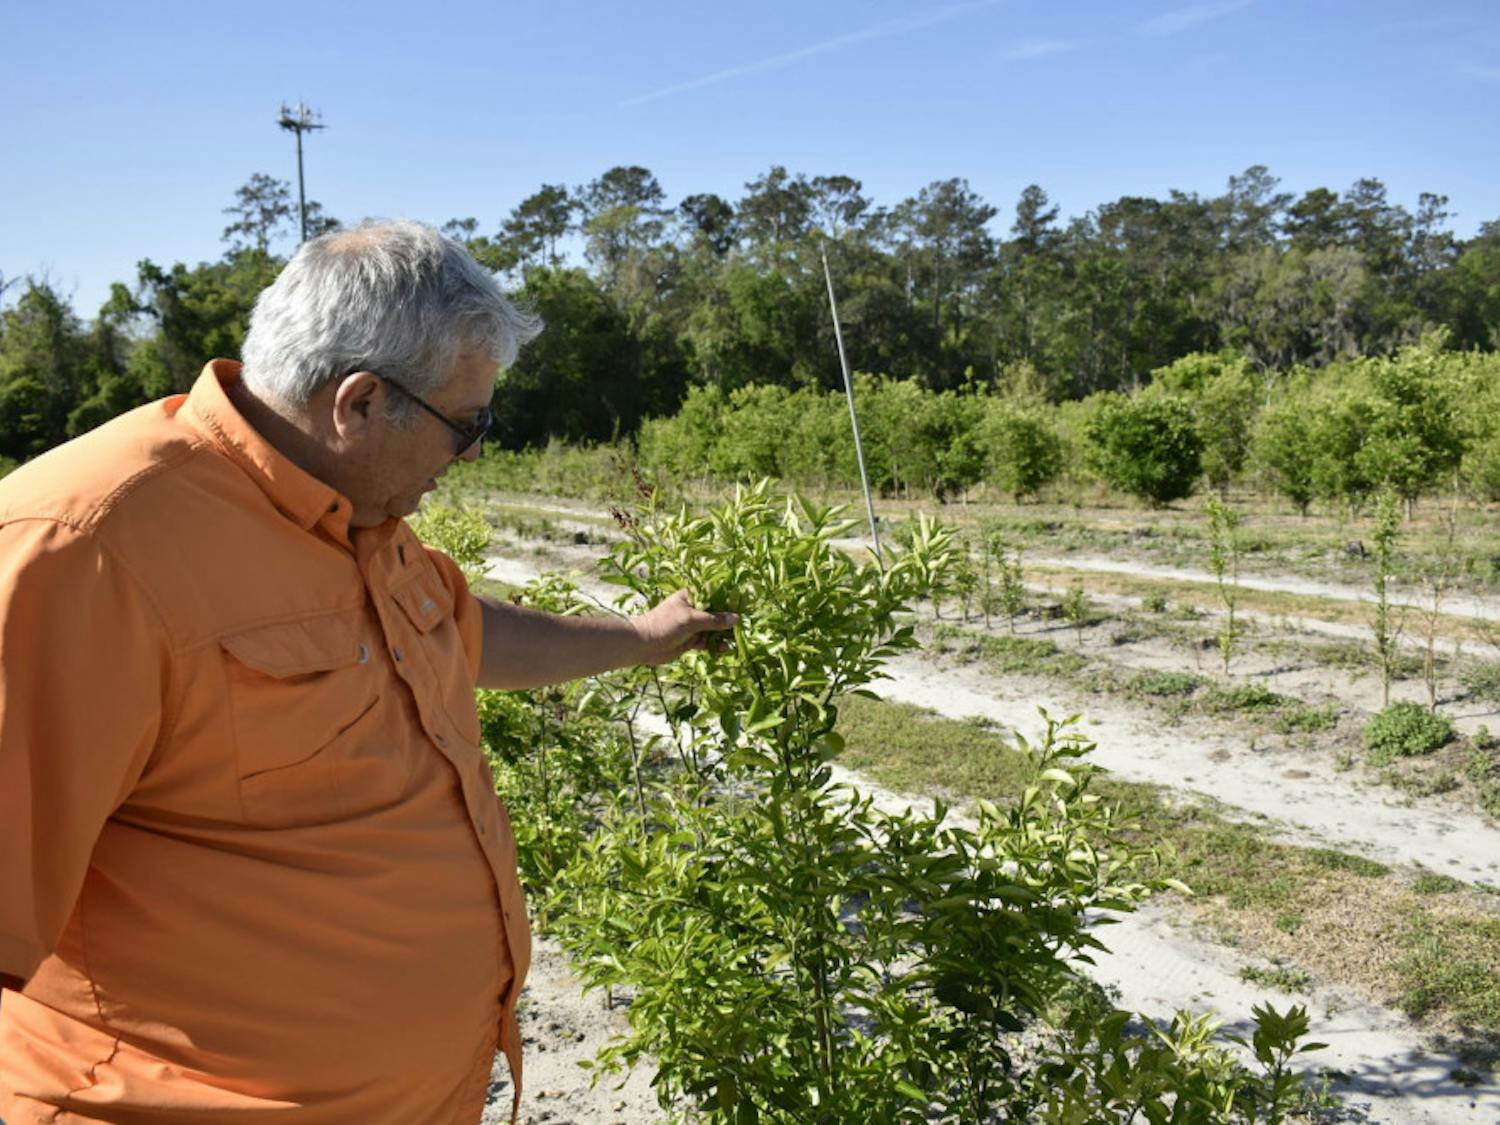 José Chaparro, an associate horticultural sciences professor who’s been breeding fruit varieties at UF since 2004, checks on a citrus plant variety bred with genes to make it more freeze-resistant.